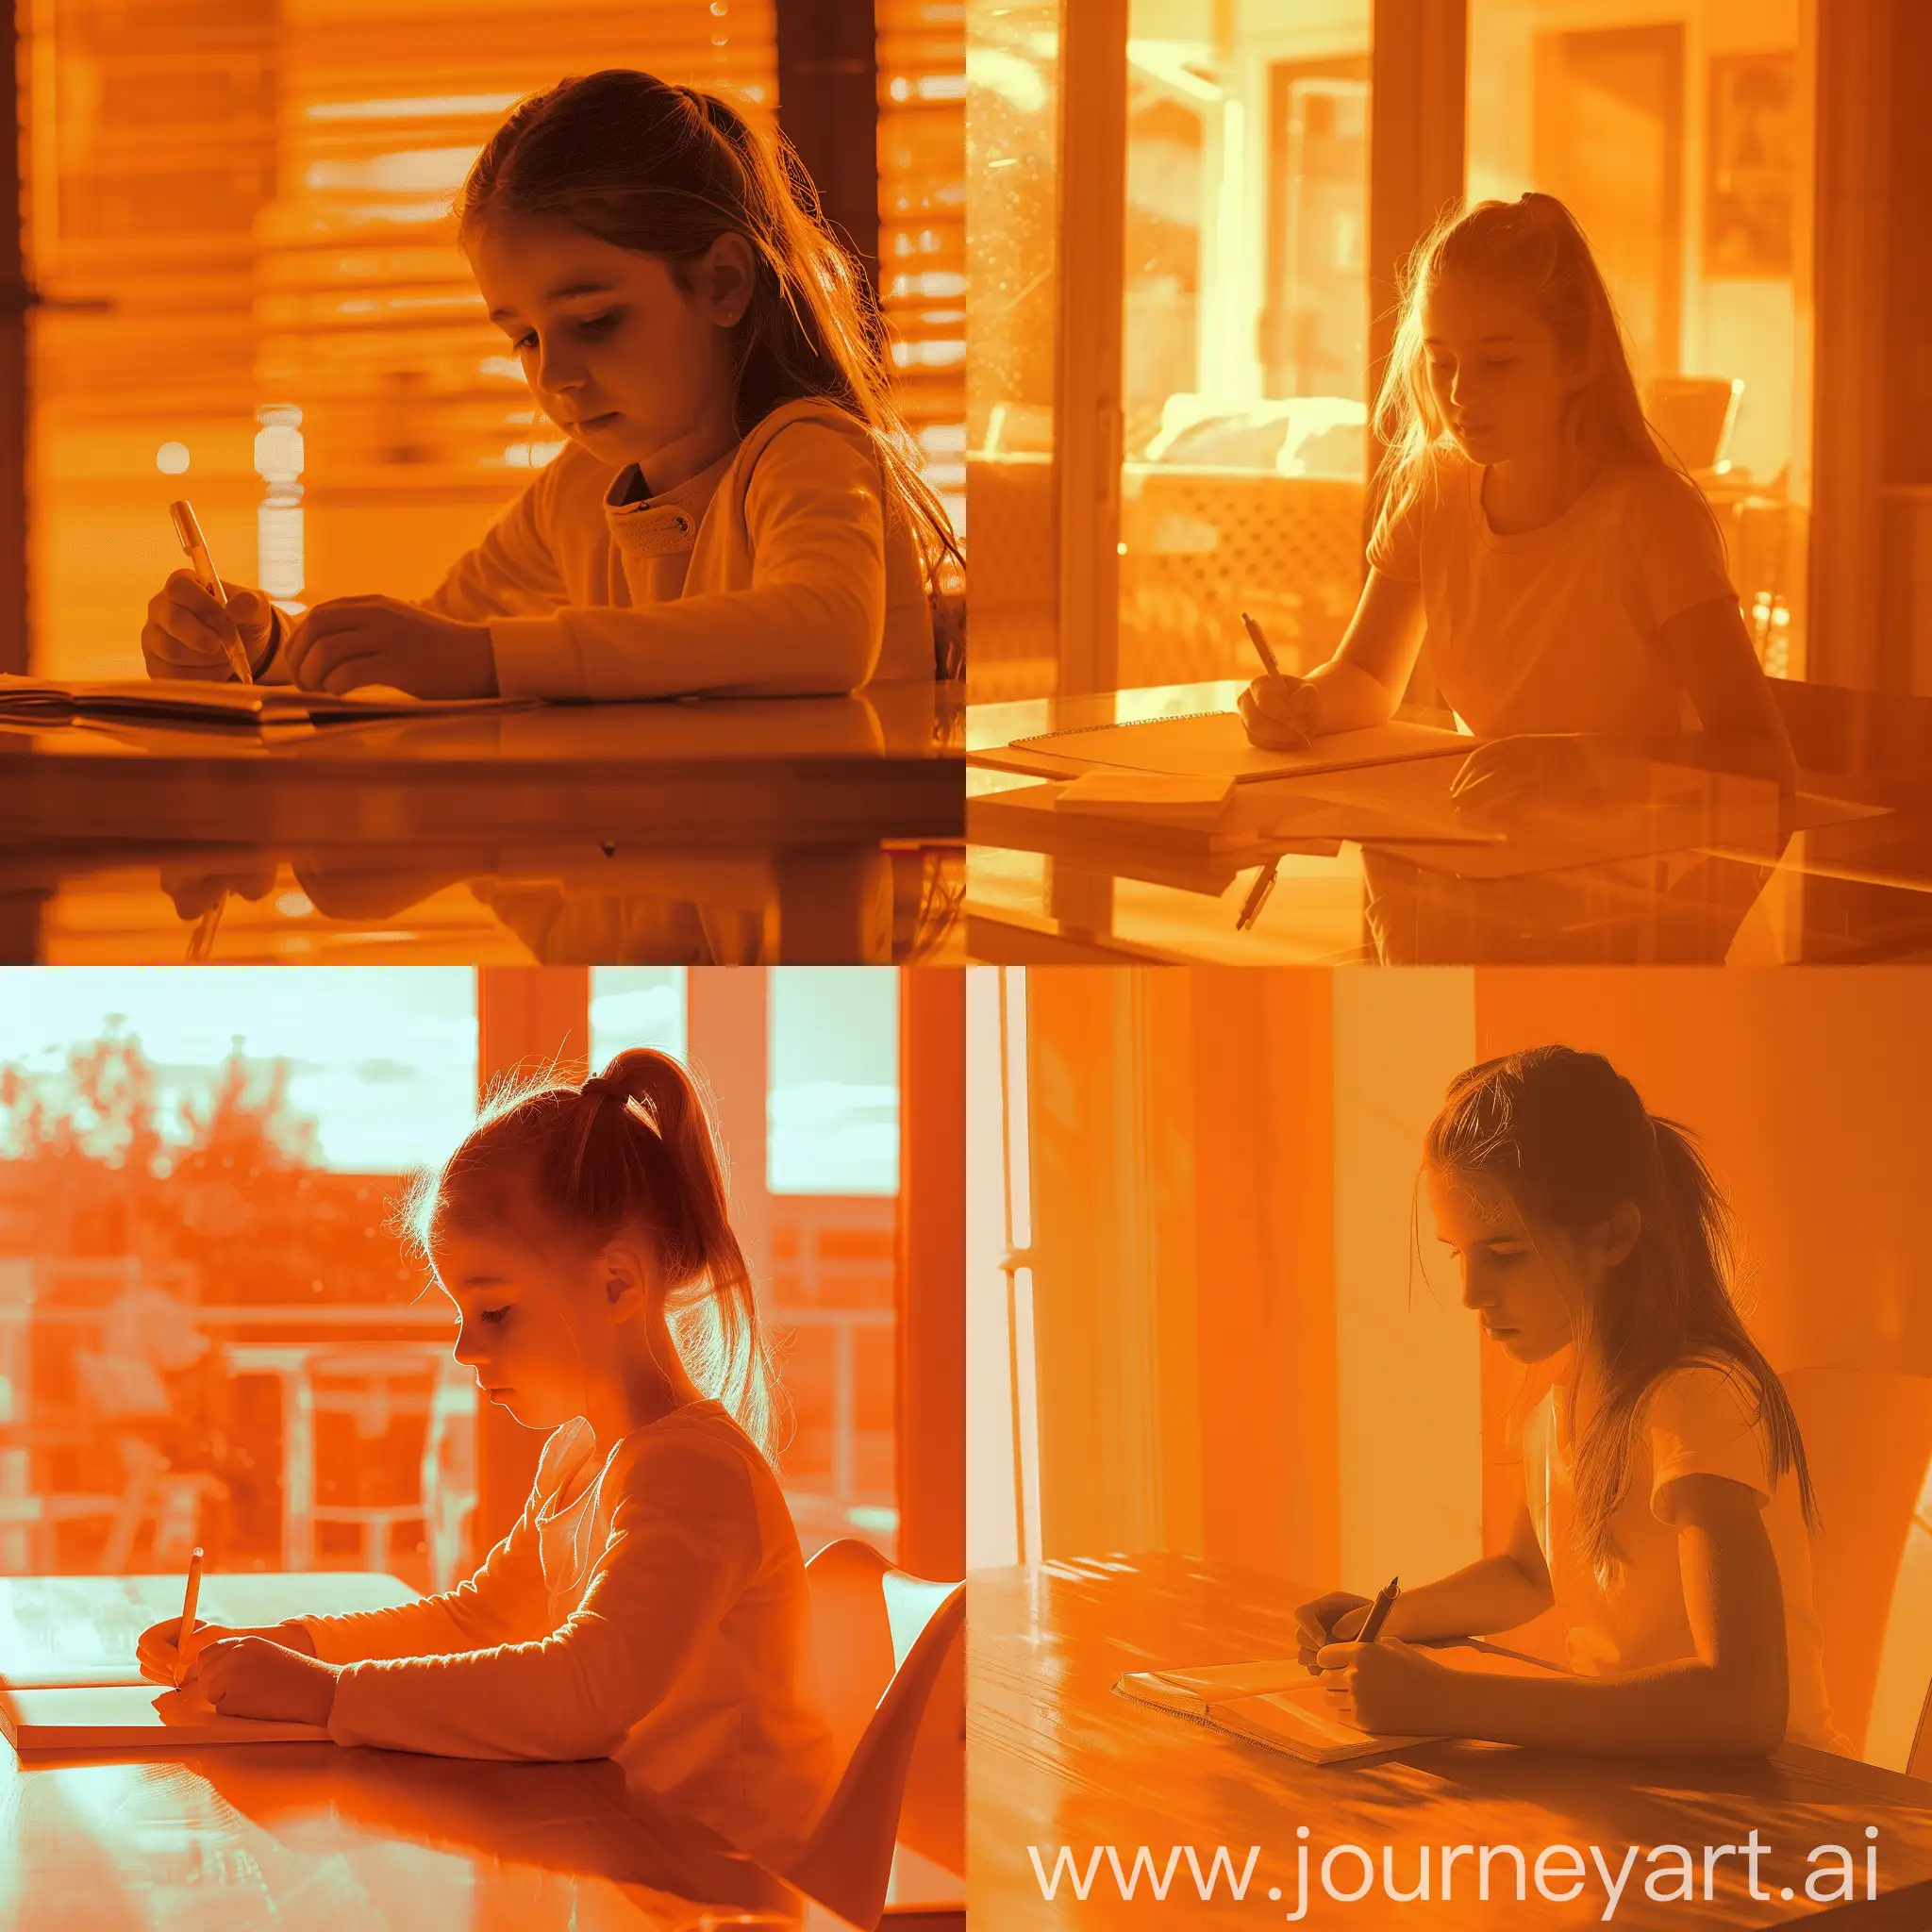 the girl is sitting at the table and doing her homework, the image is in orange shades